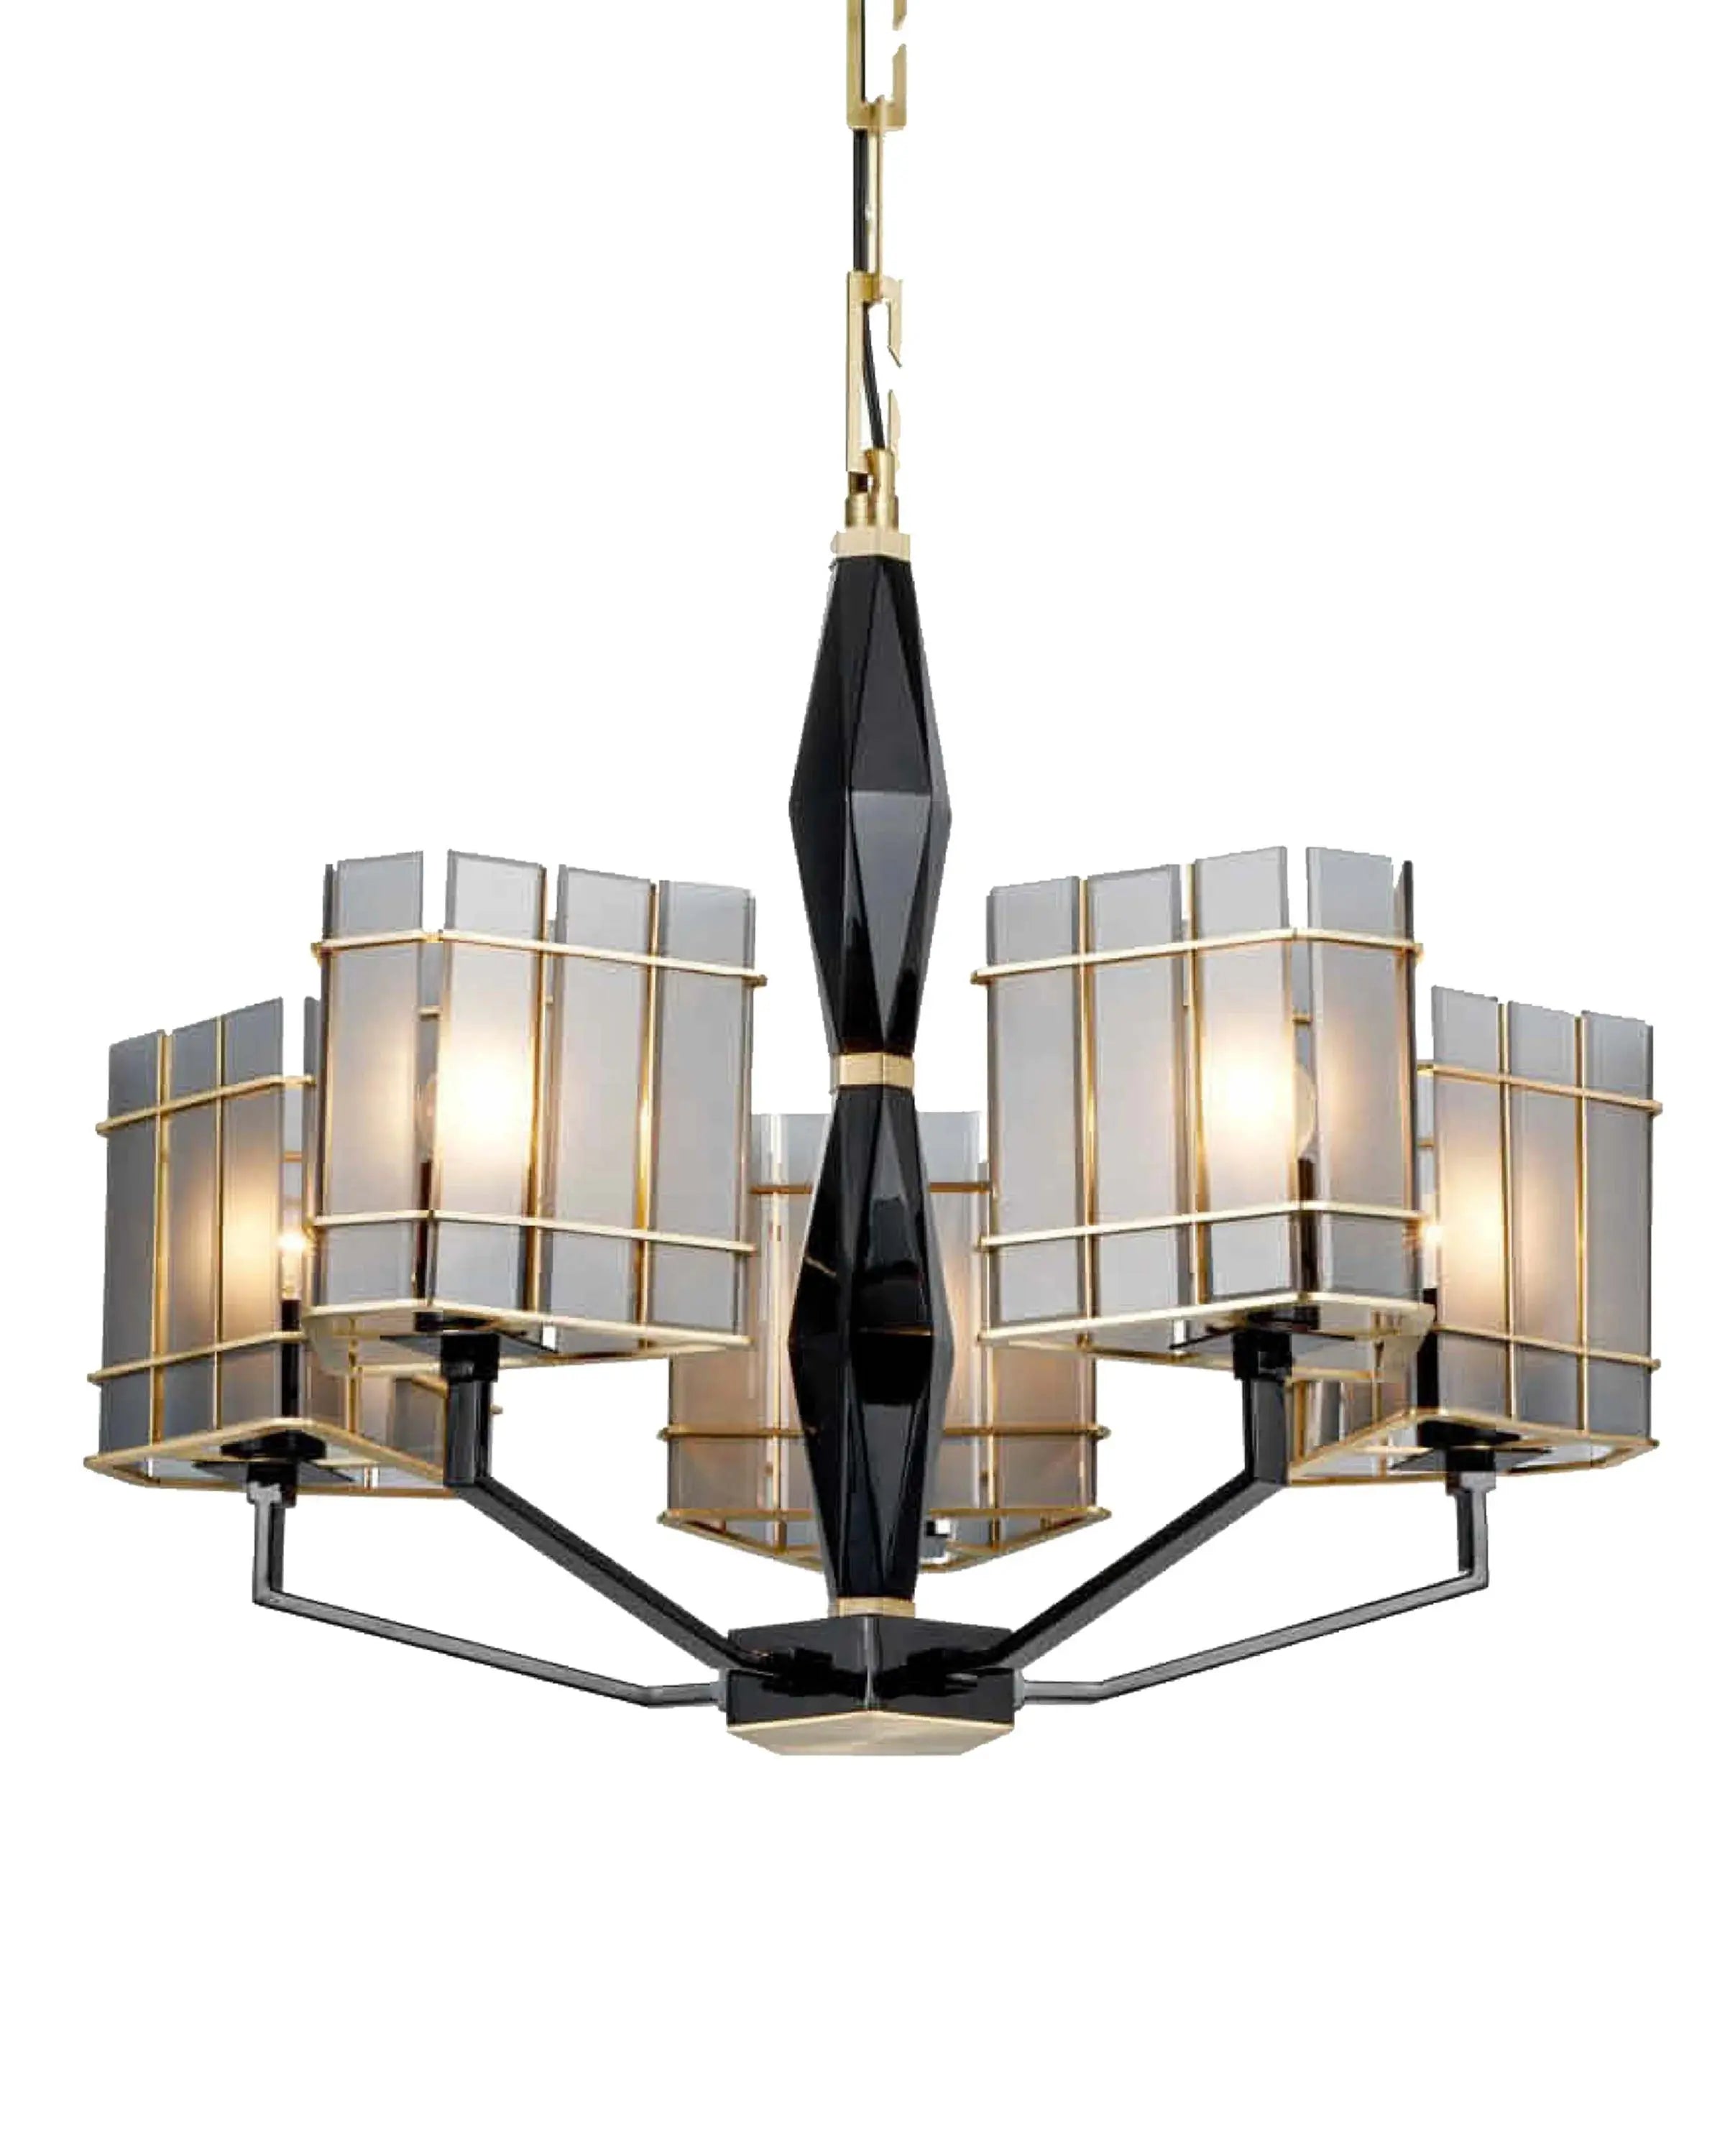 SPARKLE Crystal Chandelier Light ANGIE HOMES